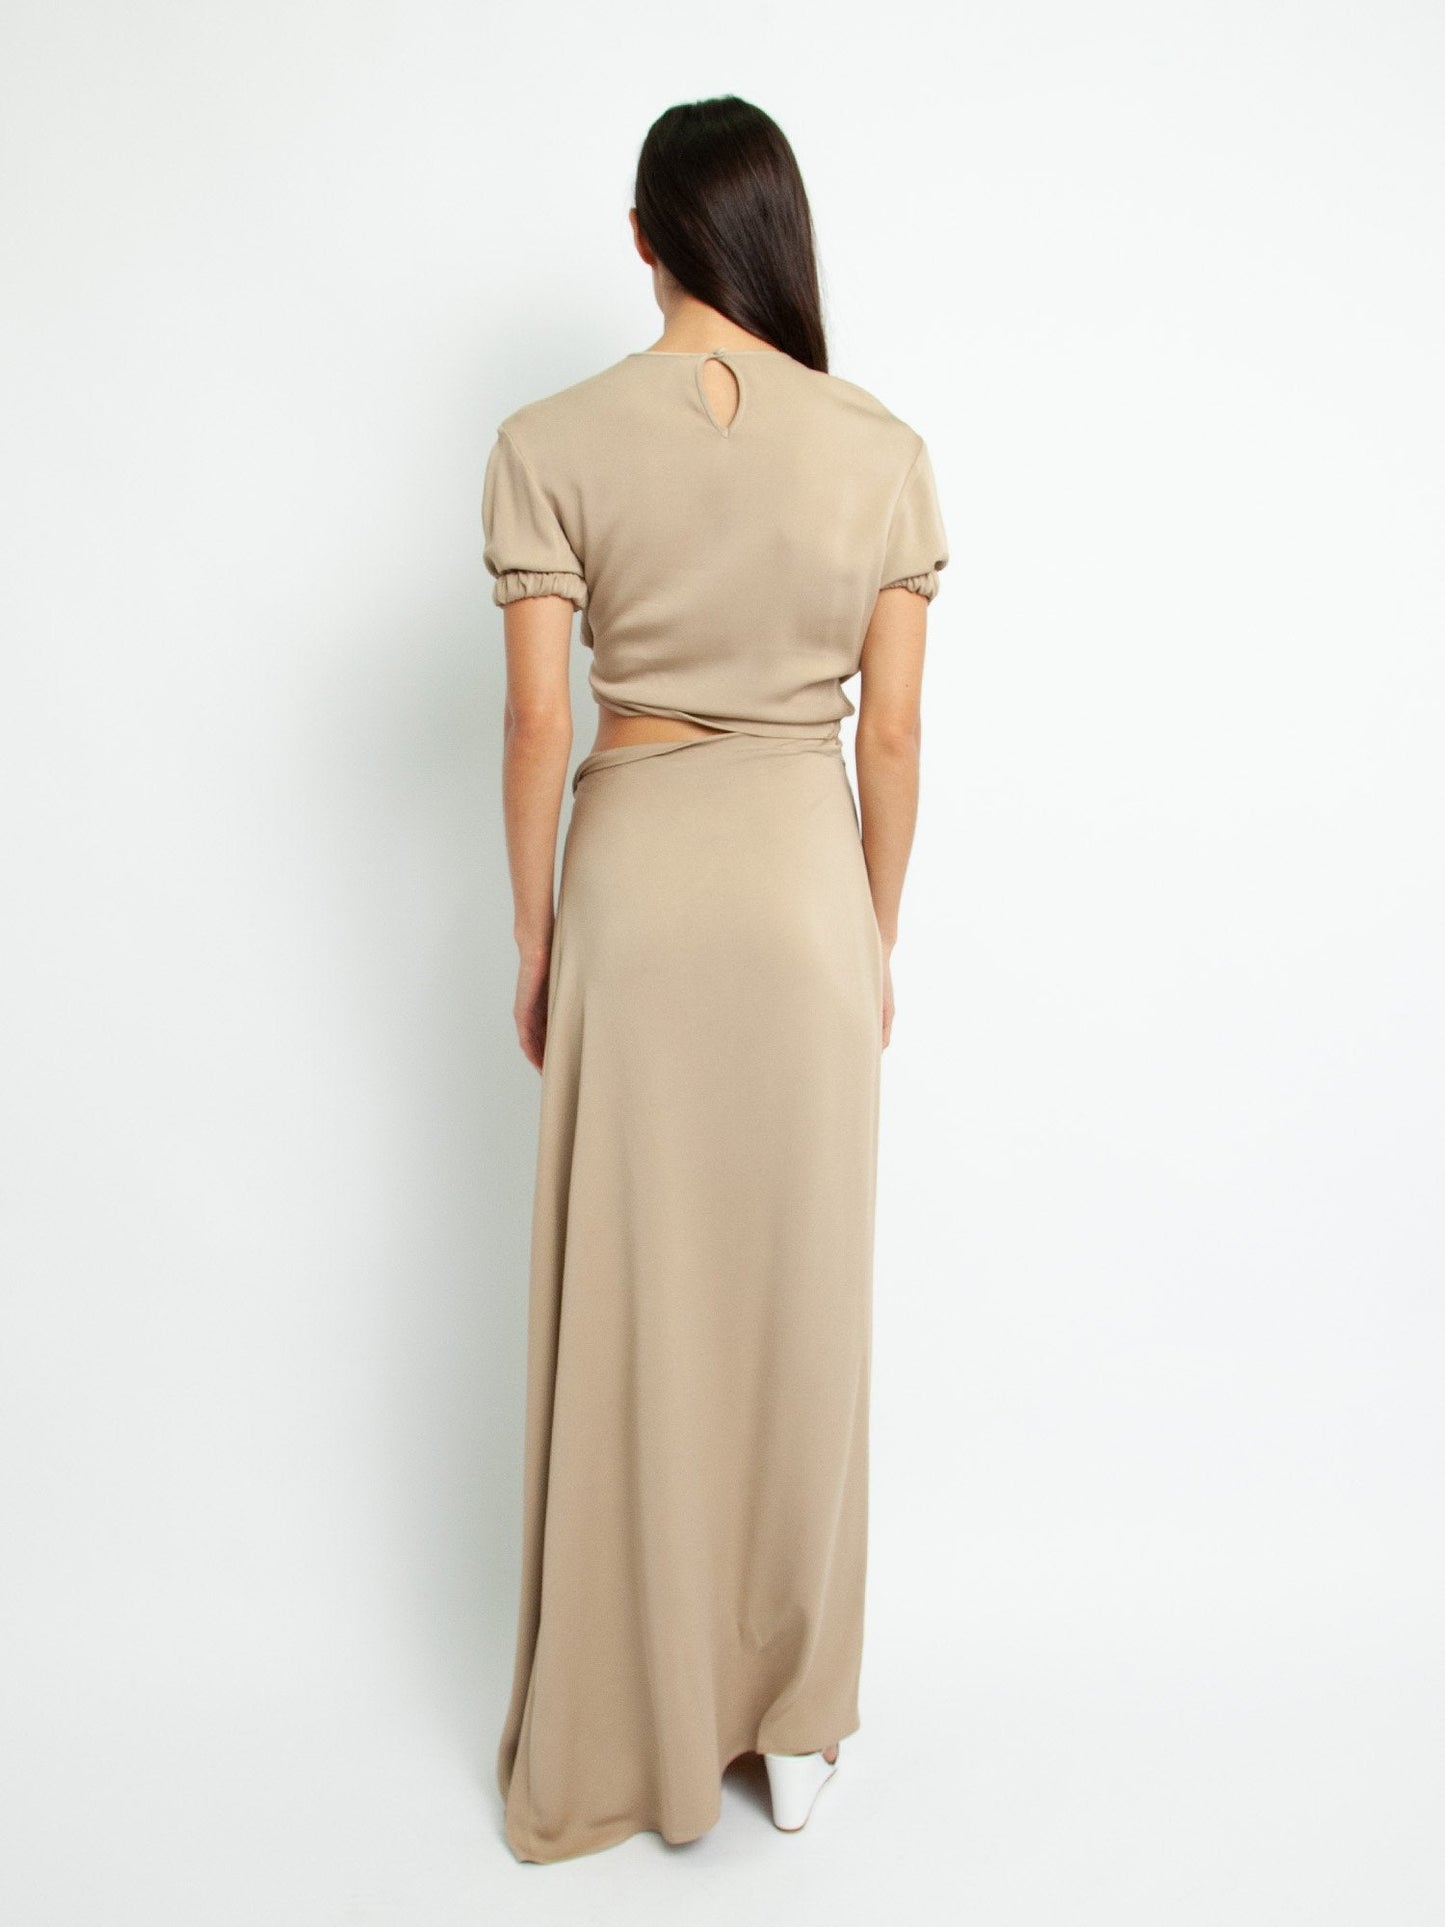 CHRISTOPHER ESBER - ROLLED UP TEE MAXI DRESS - TAN Back full length view